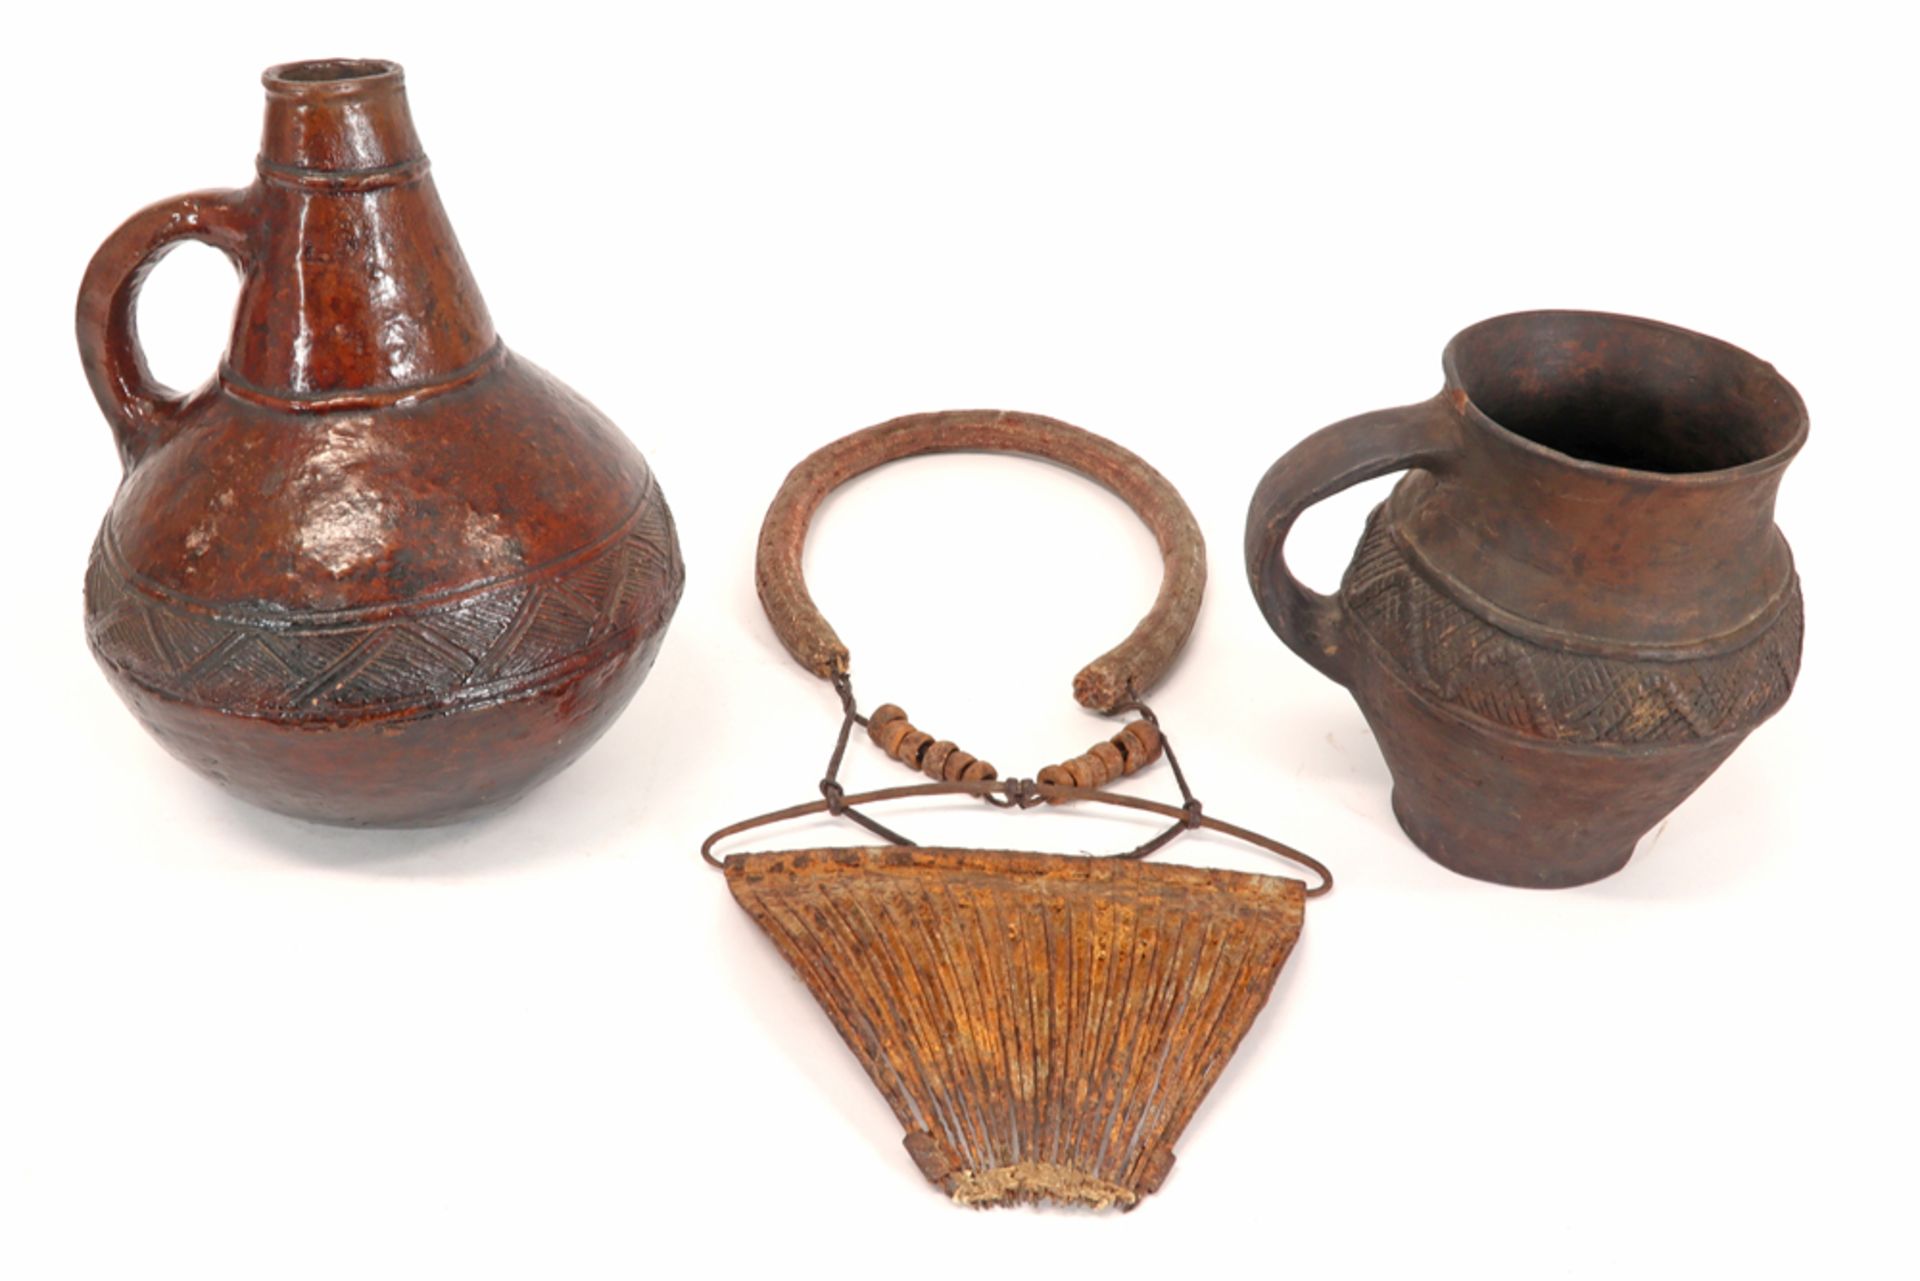 three African items : a Congolese drinking bottle of the Kasaï (ca 1910) in earthenware, a Congolese